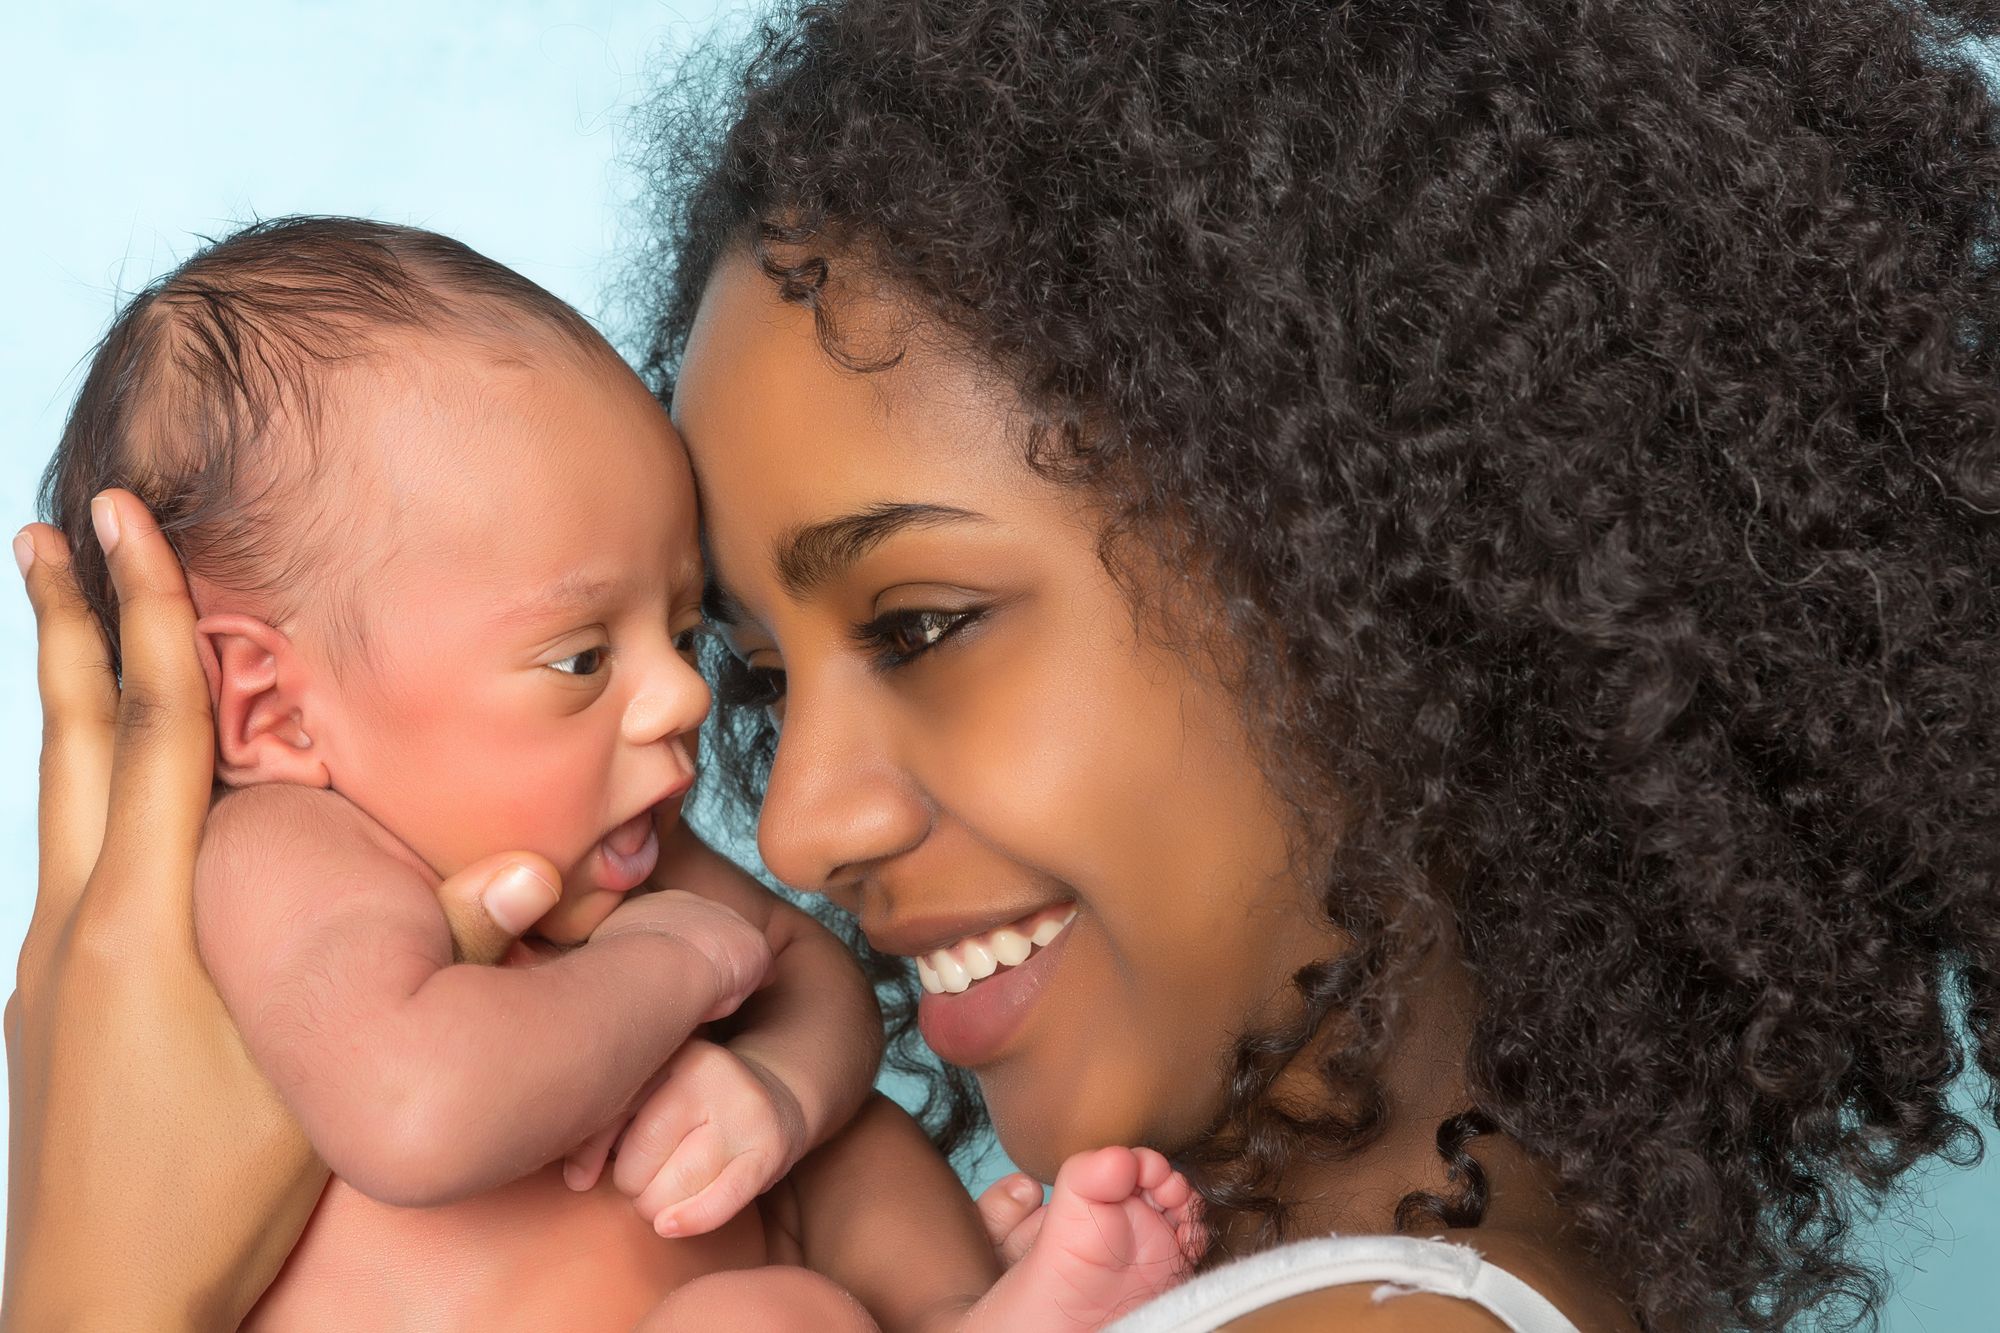 NYC Health + Hospitals/Coney Island Provides Breastfeeding Support for Mothers (Sponsored)